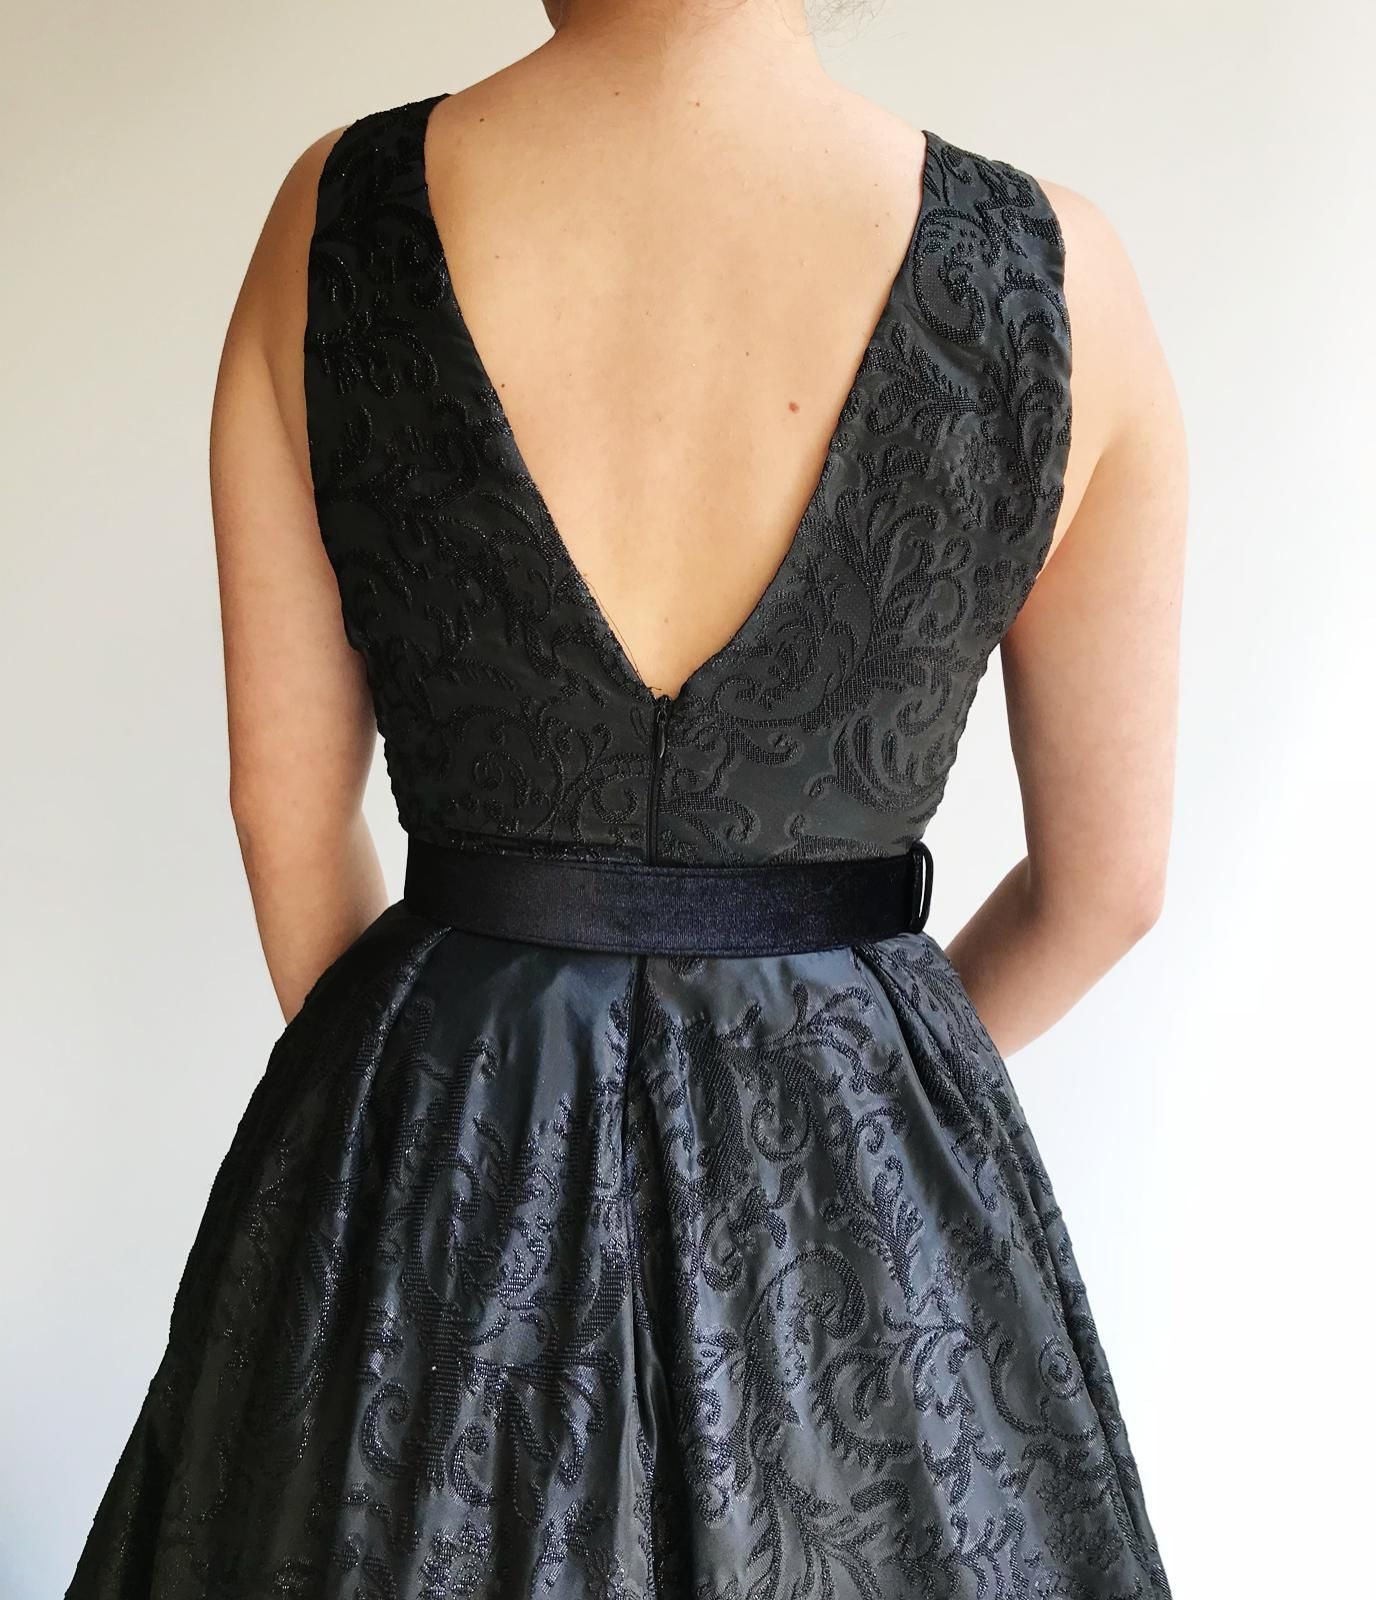 Black A-Line dress with v-neck, no sleeves and embroidery